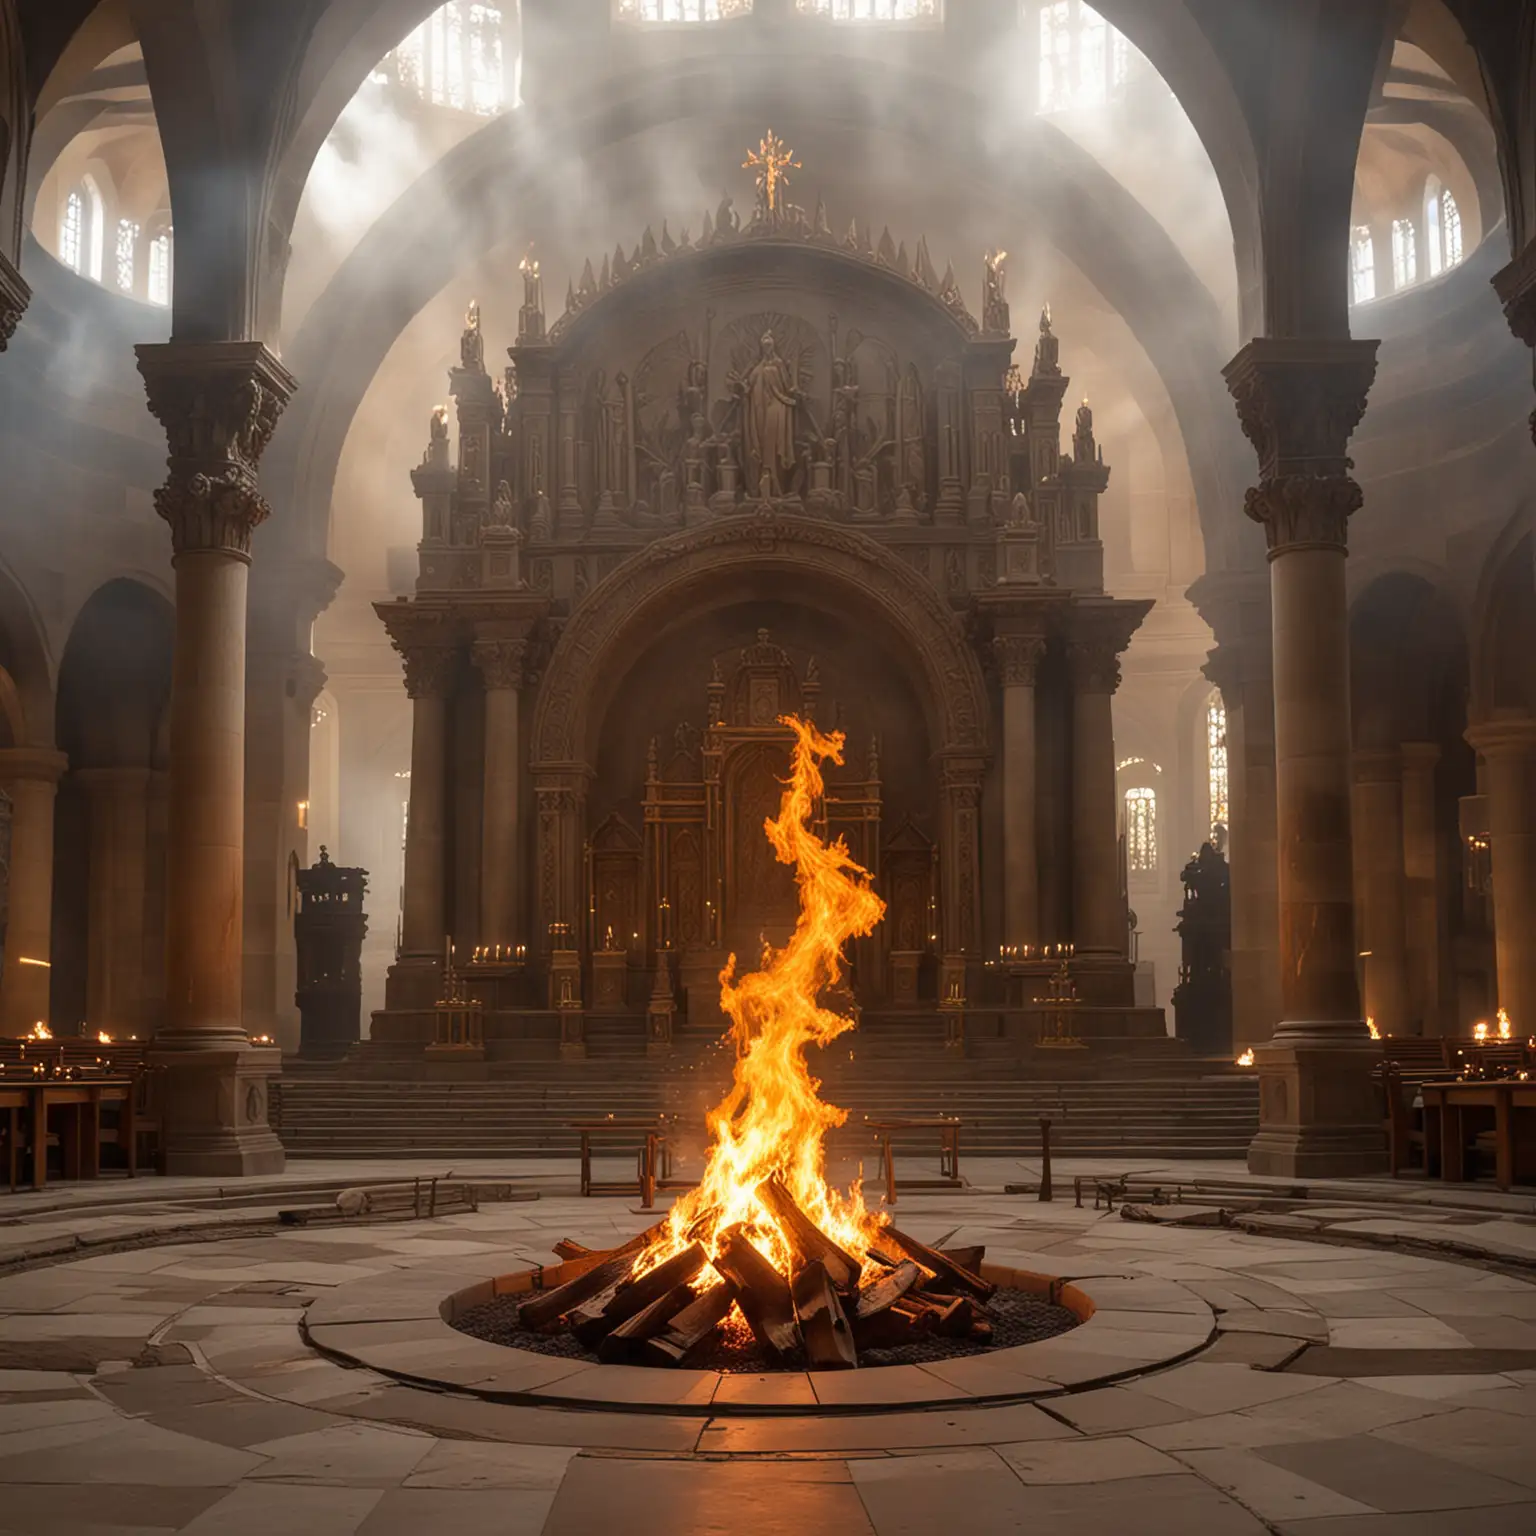 Sacred-Sanctuary-with-Central-Fire-Symbolizing-Strength-and-Spirituality